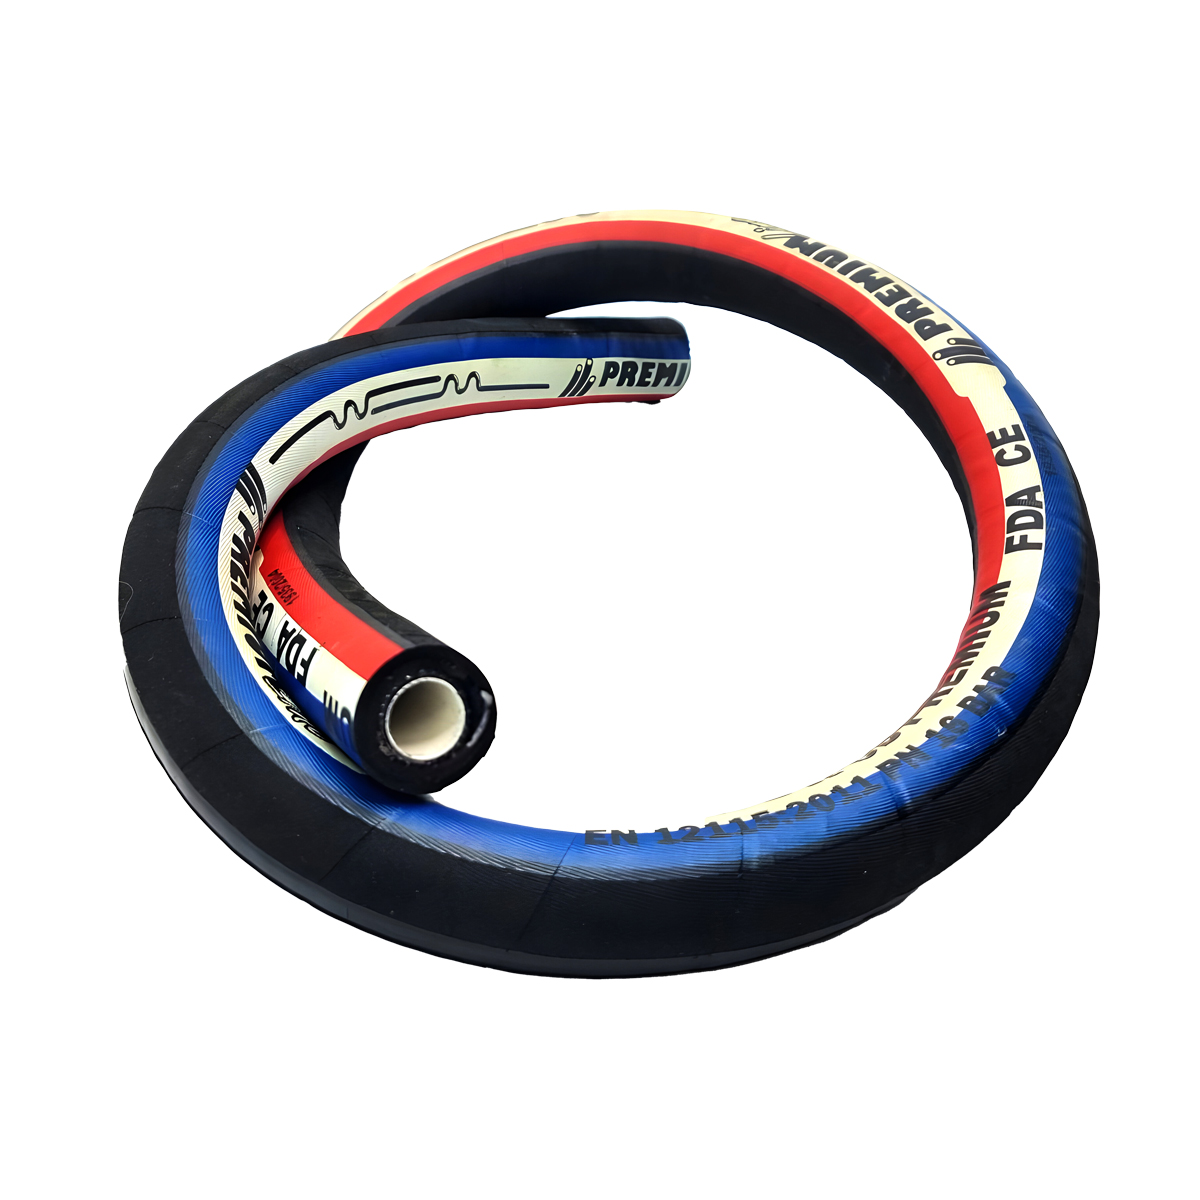 Chemical hose teflon inner surface - chimtub/ptfe-102dup chemical hose teflon inner surface is specially designed for handling dangerous substances. It offers the chemical resistance of ptfe/teflon and is equipped with a wear-resistant epdm outer rubber